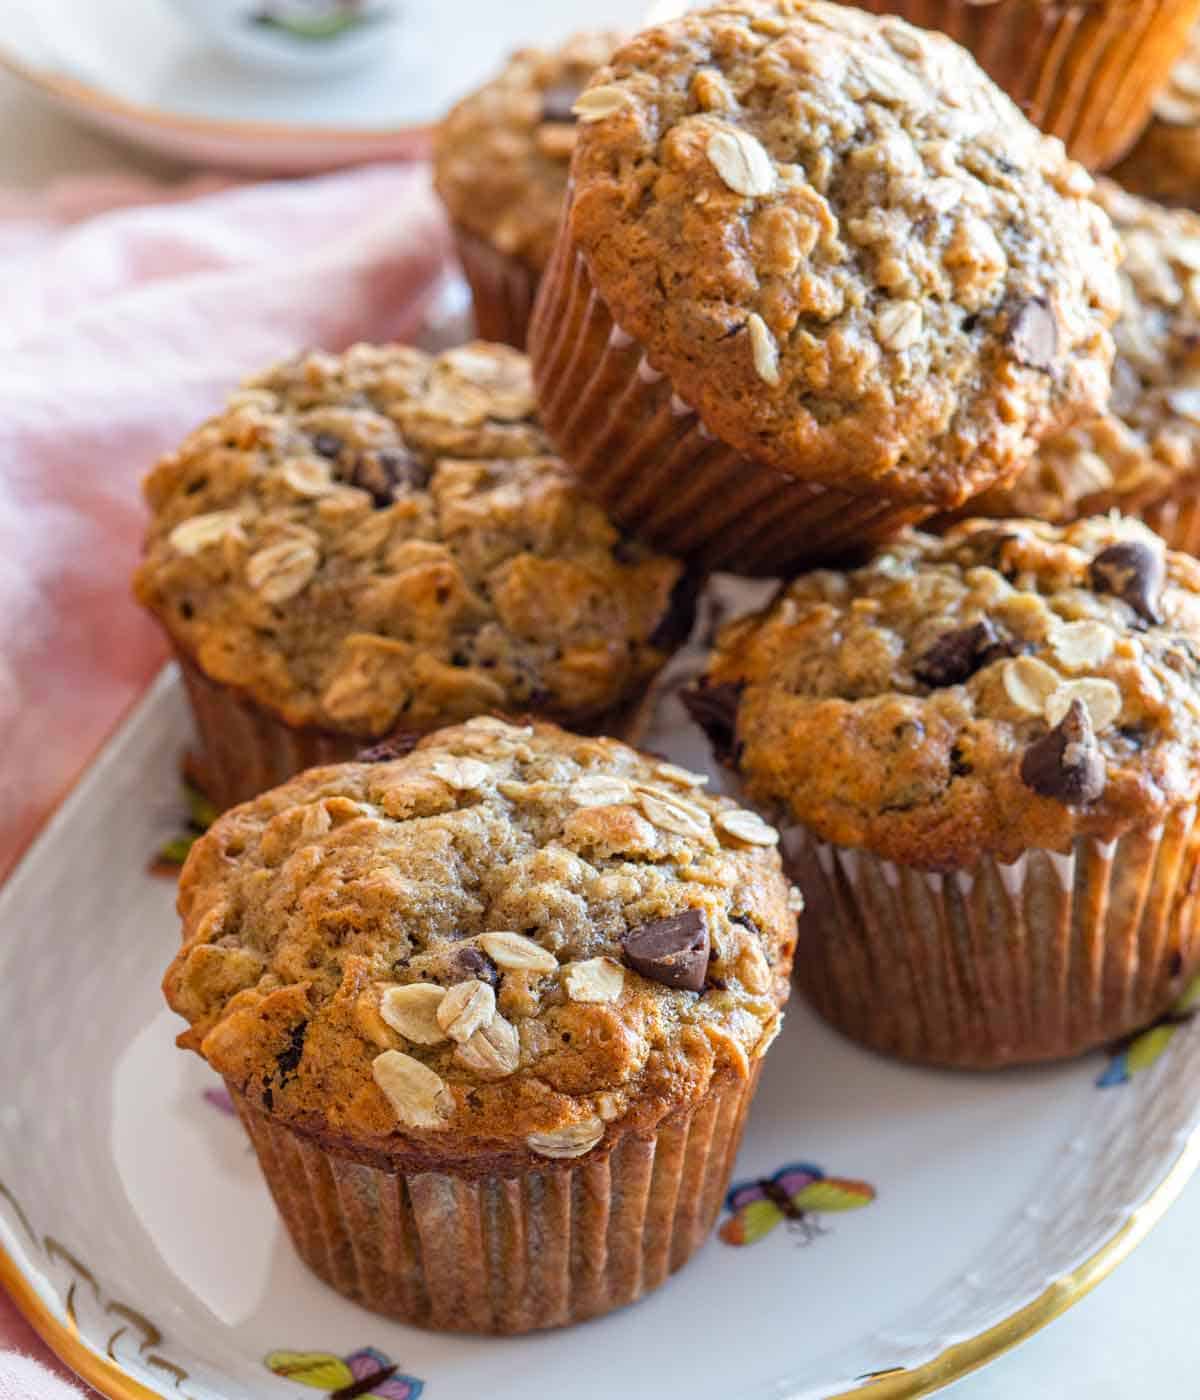 A plate with a pile of banana oatmeal muffins.